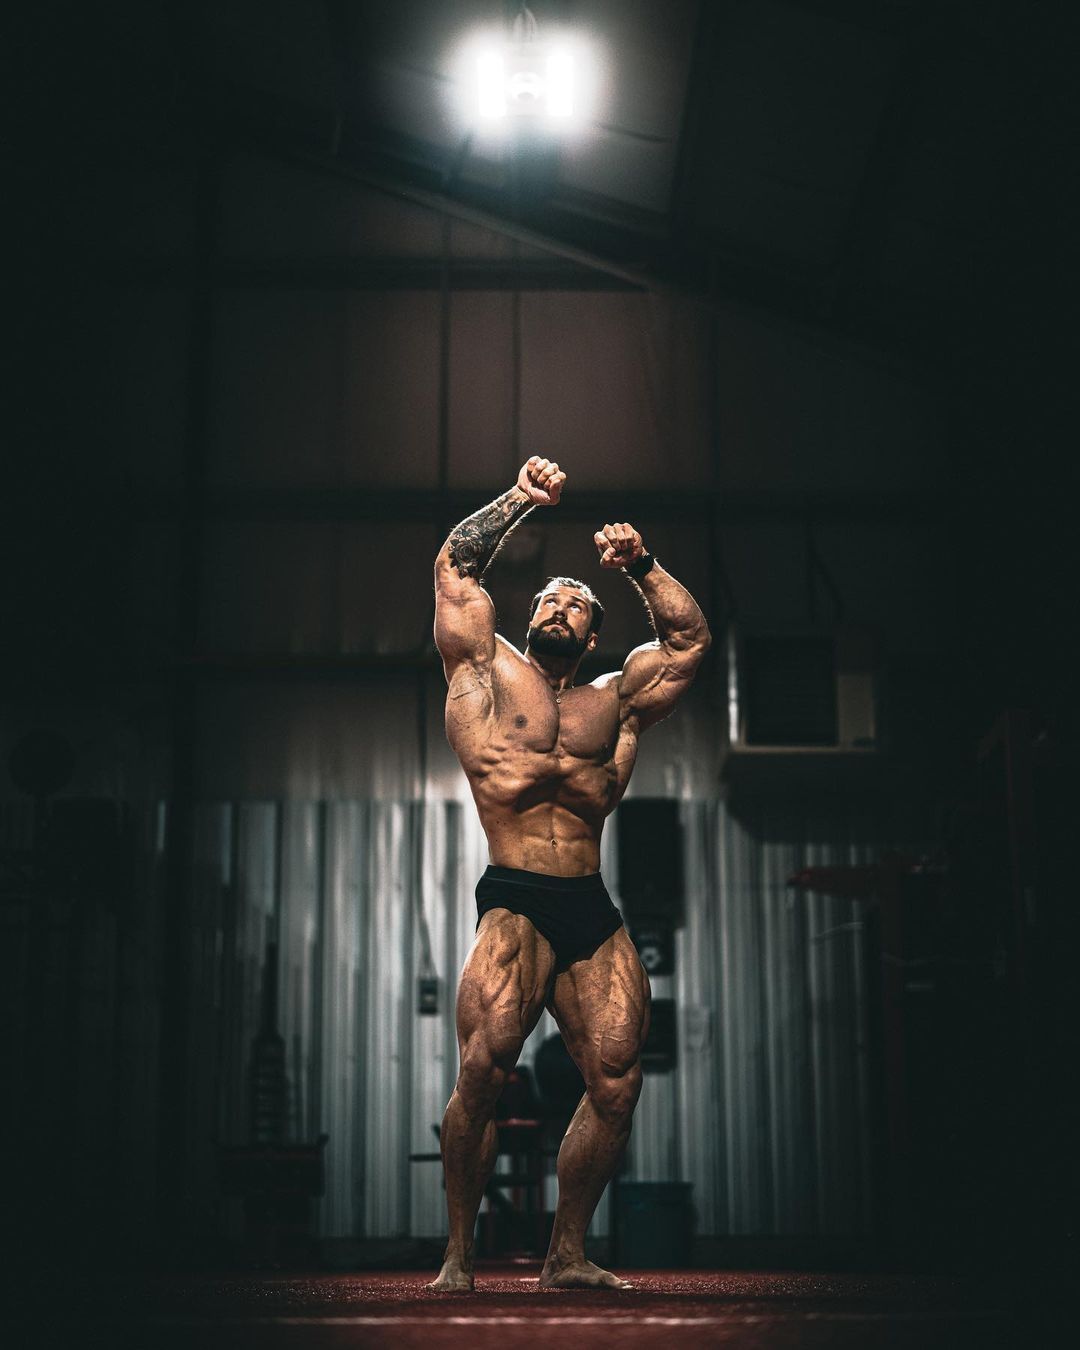 V T51.2885 15 E35 P1080x1080 129431537_3525227760891768_. Bodybuilding Picture, Bodybuilding Photography, Gym Photography